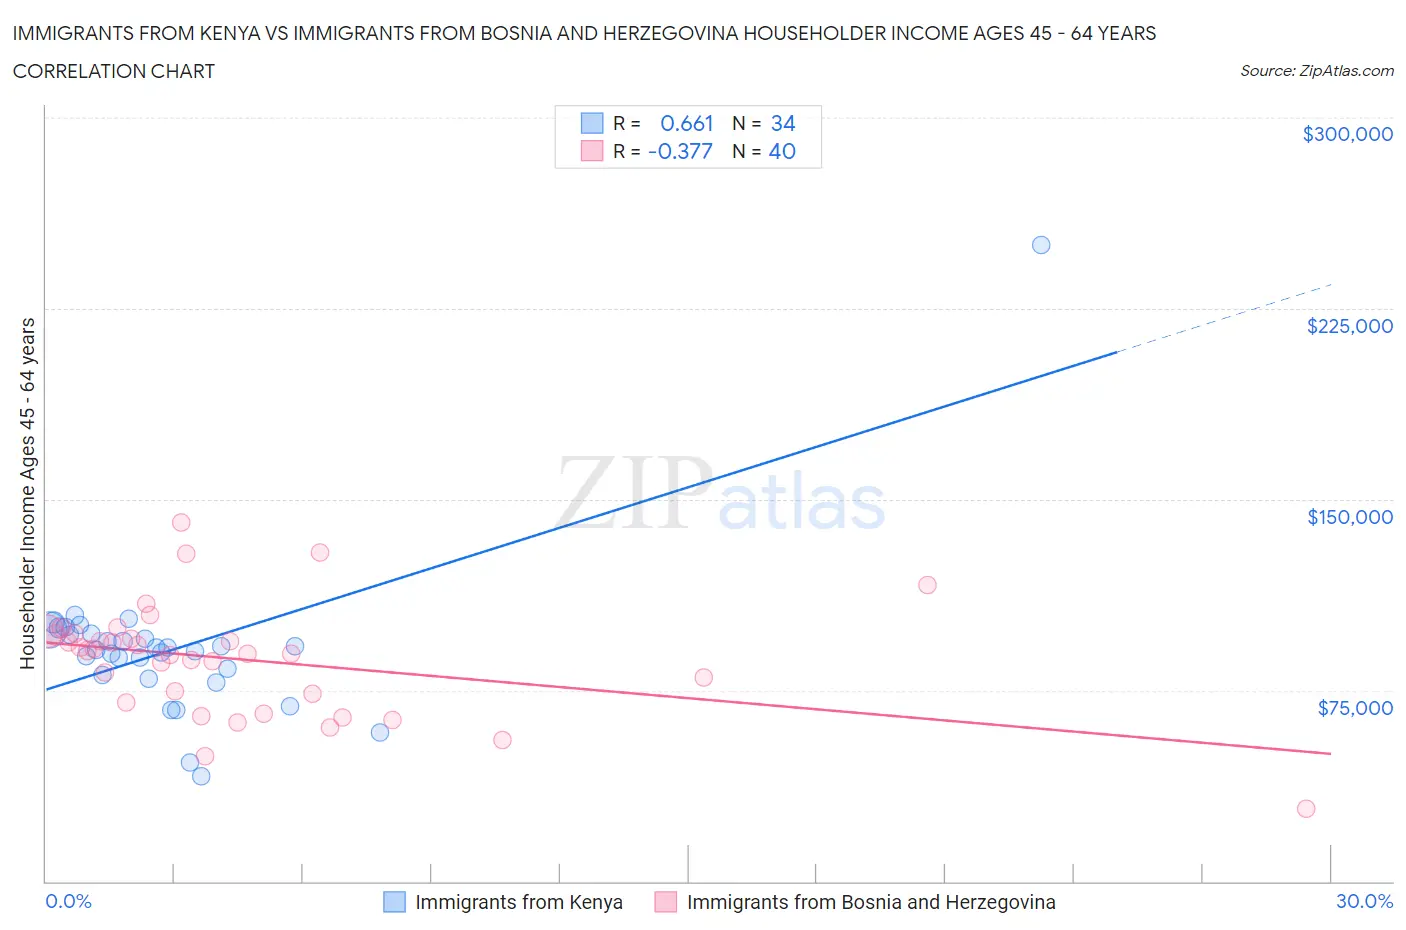 Immigrants from Kenya vs Immigrants from Bosnia and Herzegovina Householder Income Ages 45 - 64 years